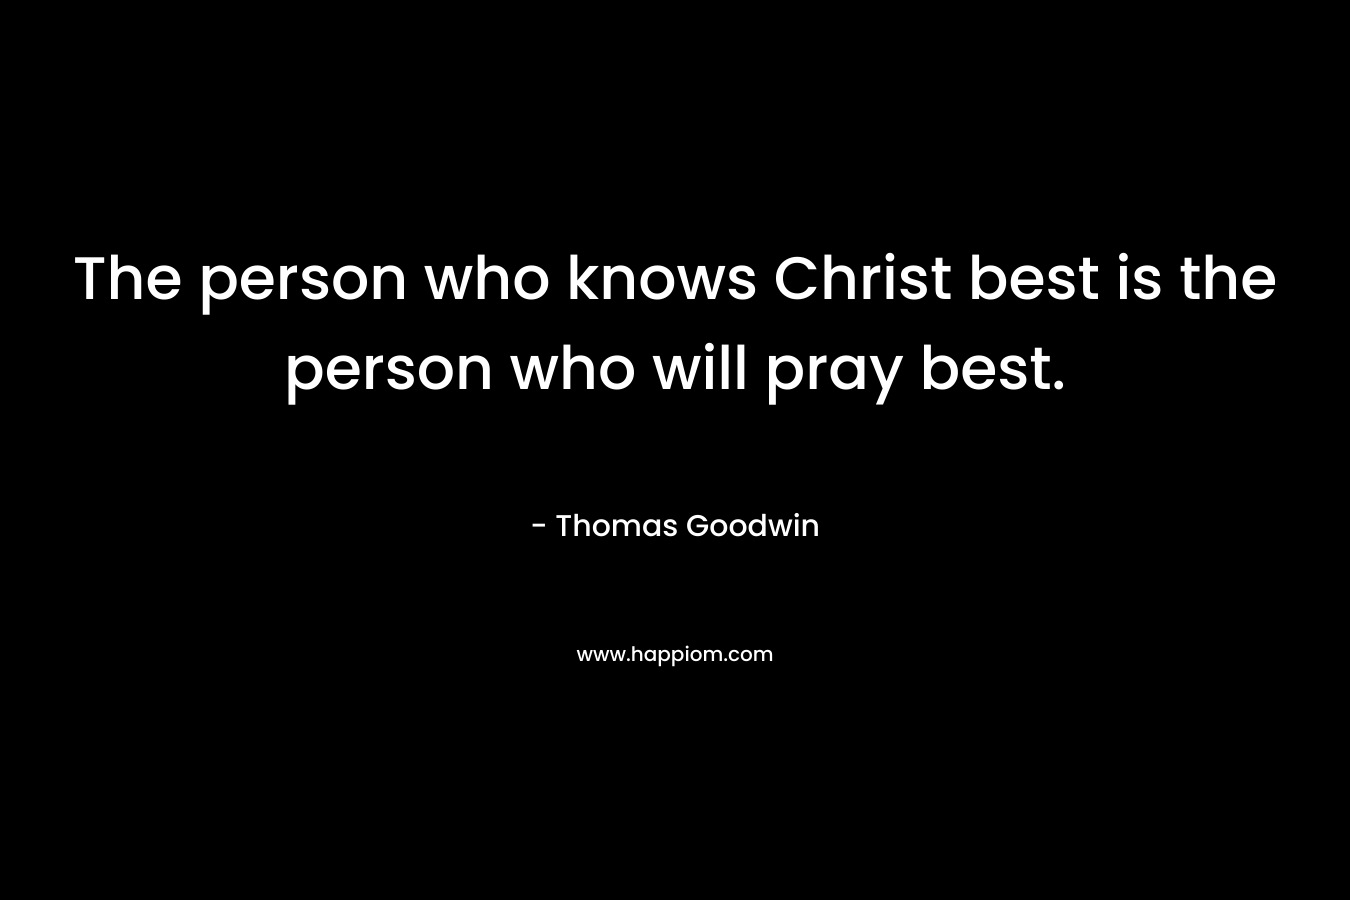 The person who knows Christ best is the person who will pray best. – Thomas Goodwin